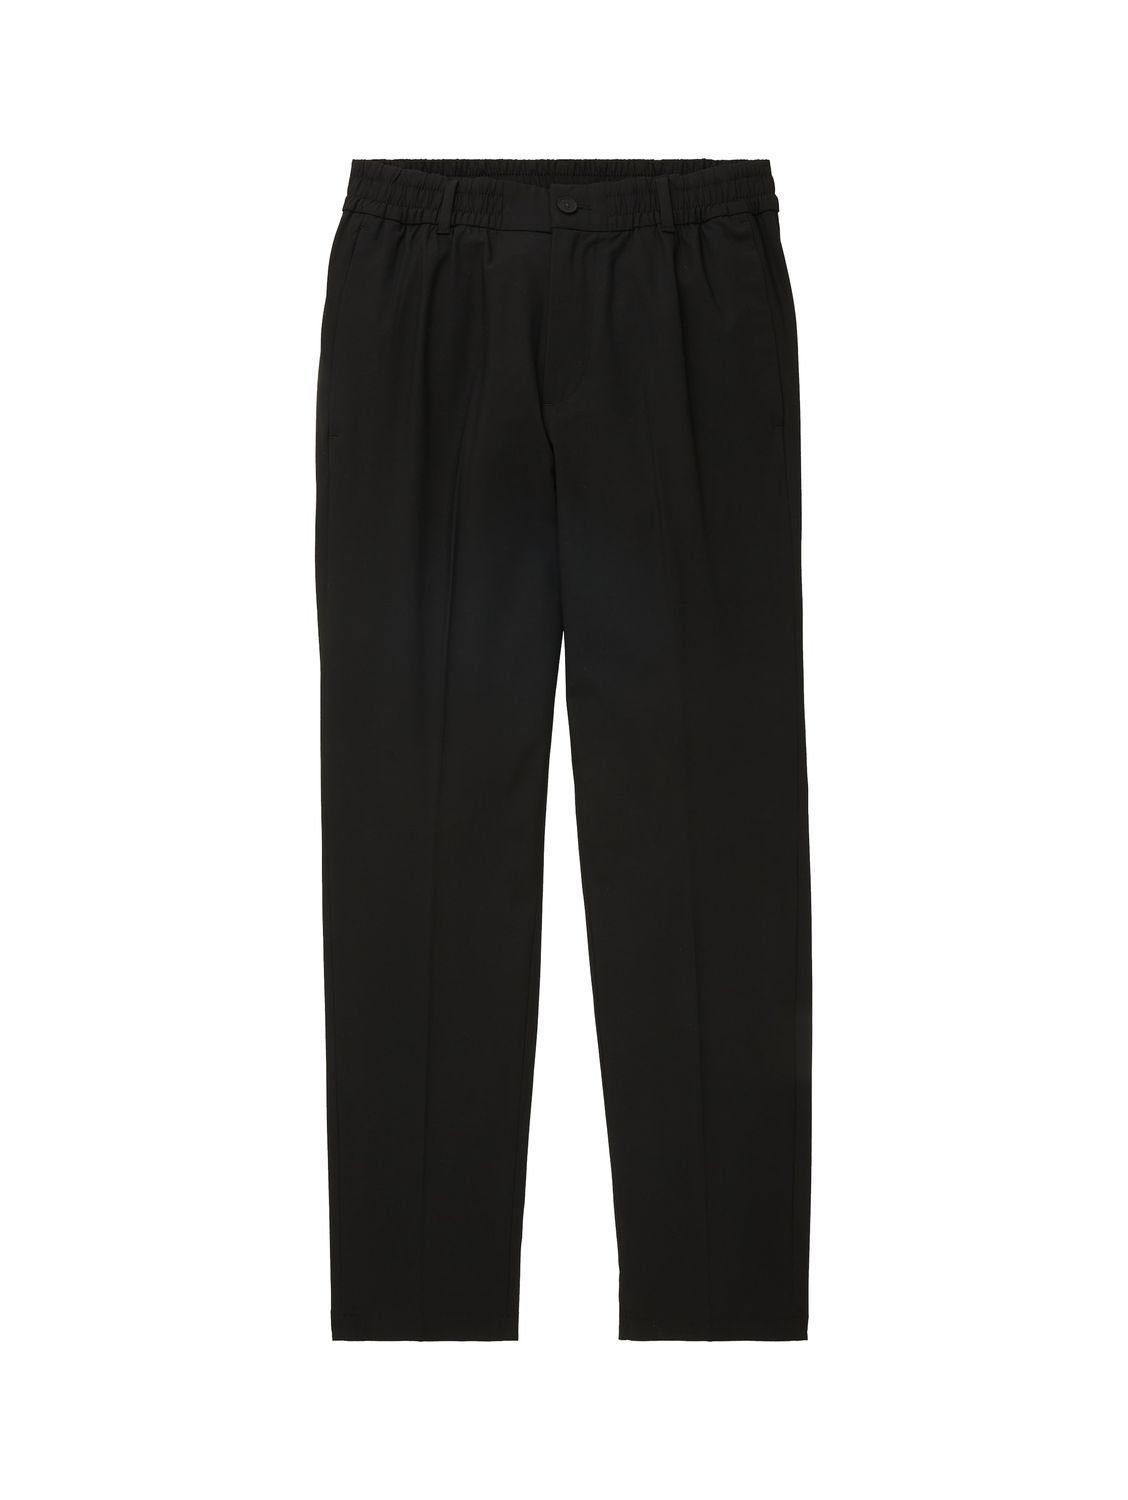 TOM TAILOR Denim Chinohose RELAXED Stretch CHINO TAPERED mit Black 29999